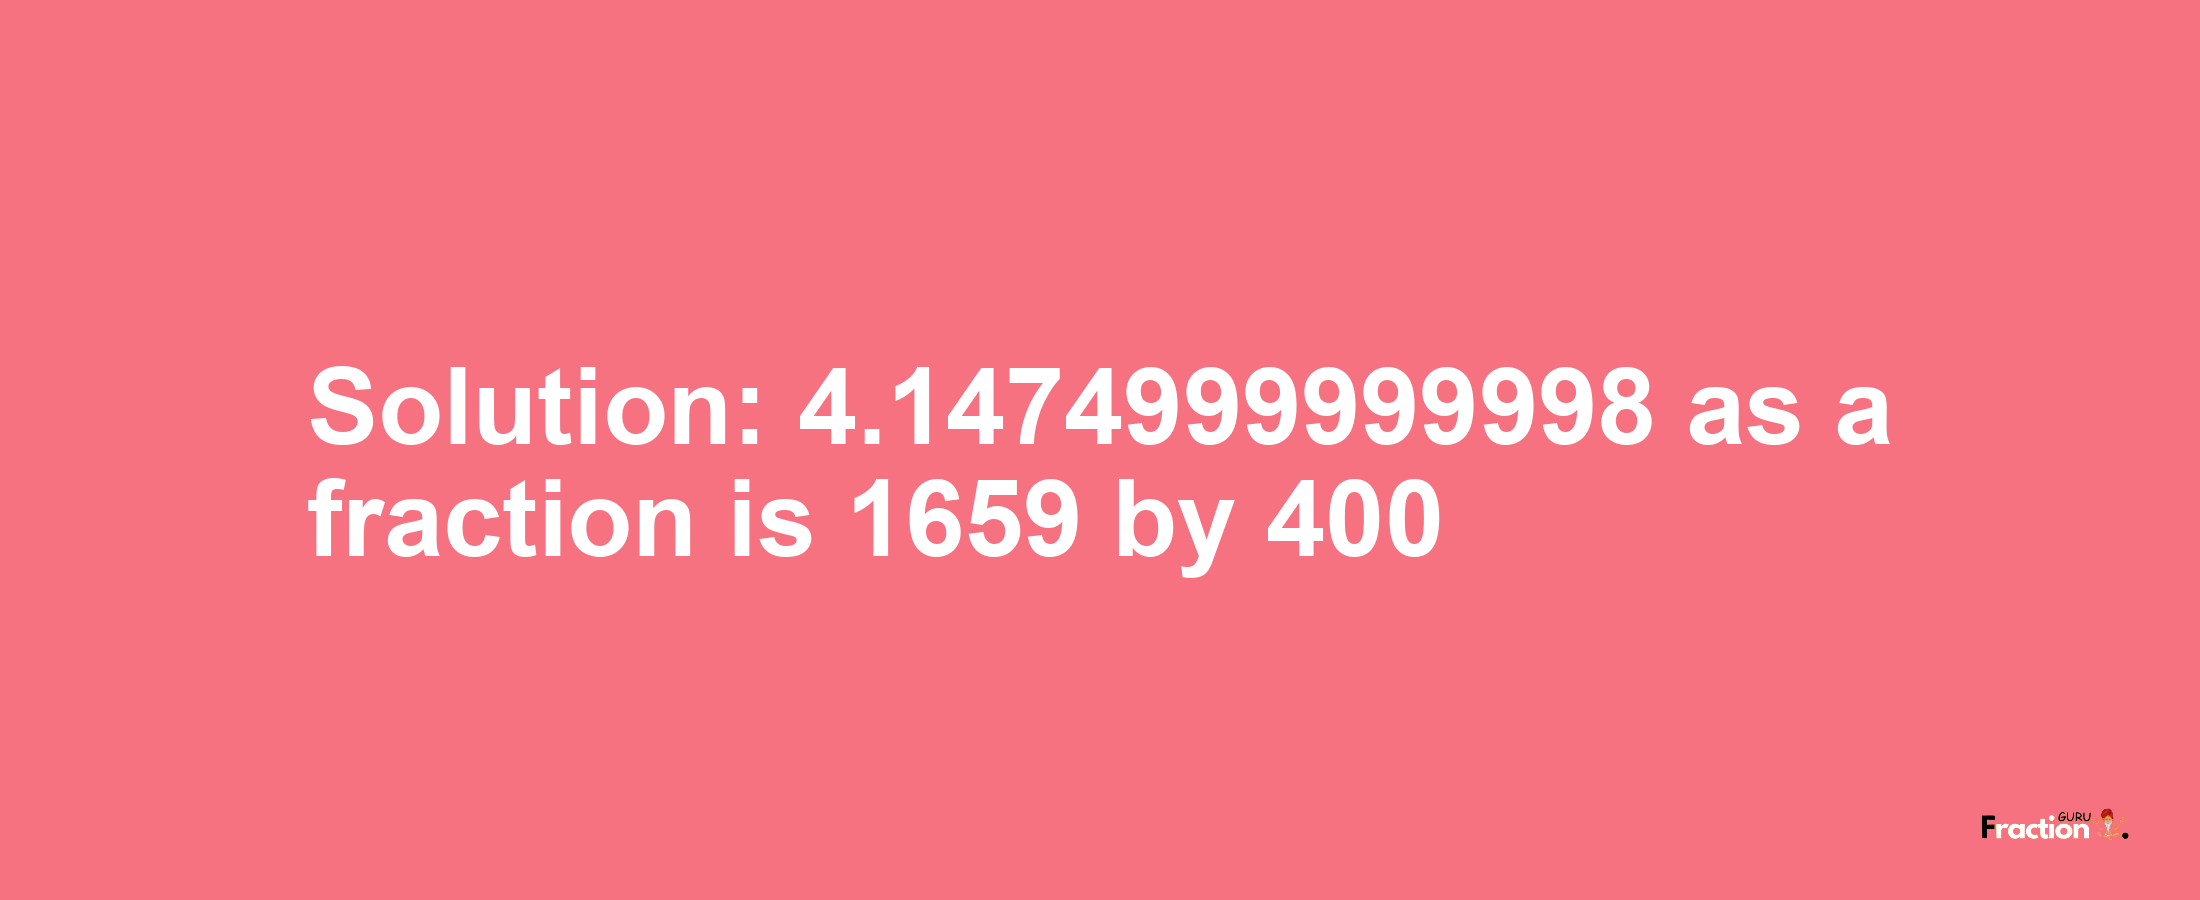 Solution:4.1474999999998 as a fraction is 1659/400